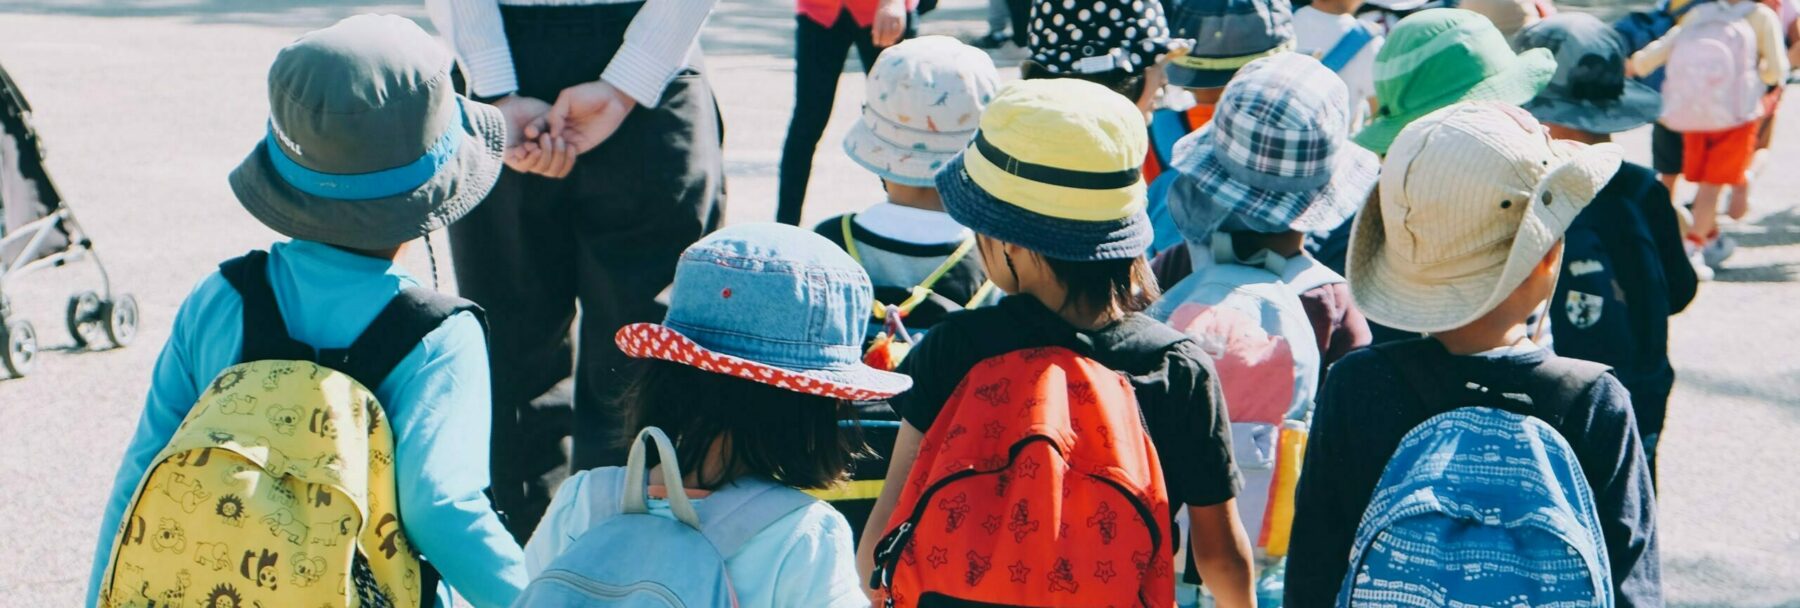 A group of children with backpacks on a school trip